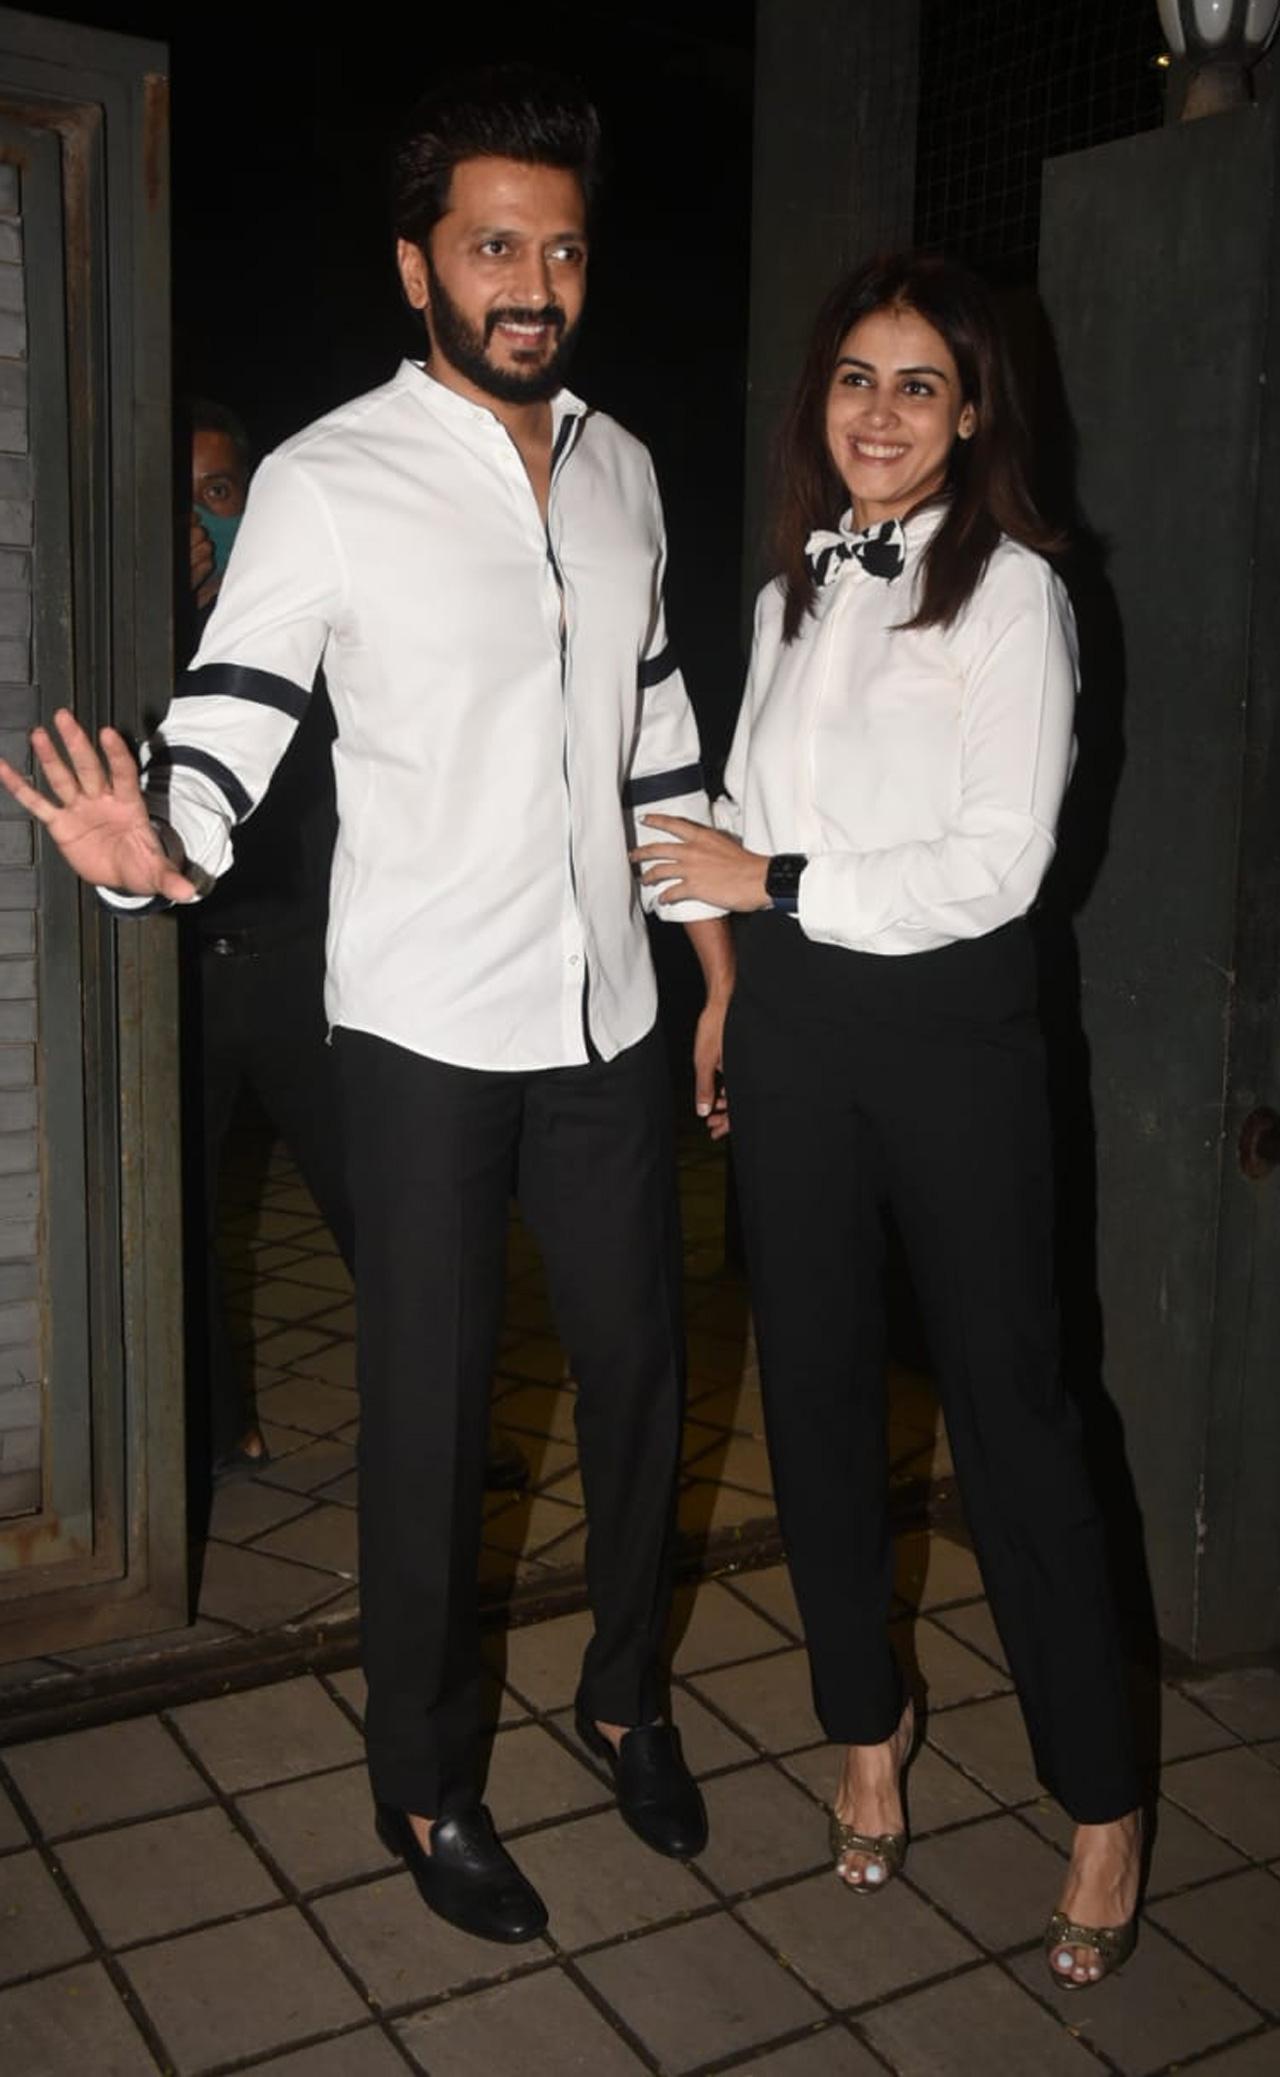 Bollywood couple Riteish Deshmukh, Genelia D'Souza twinned in white and were all smiles as they were clicked at Arpita Khan and Aayush Sharma's residence.